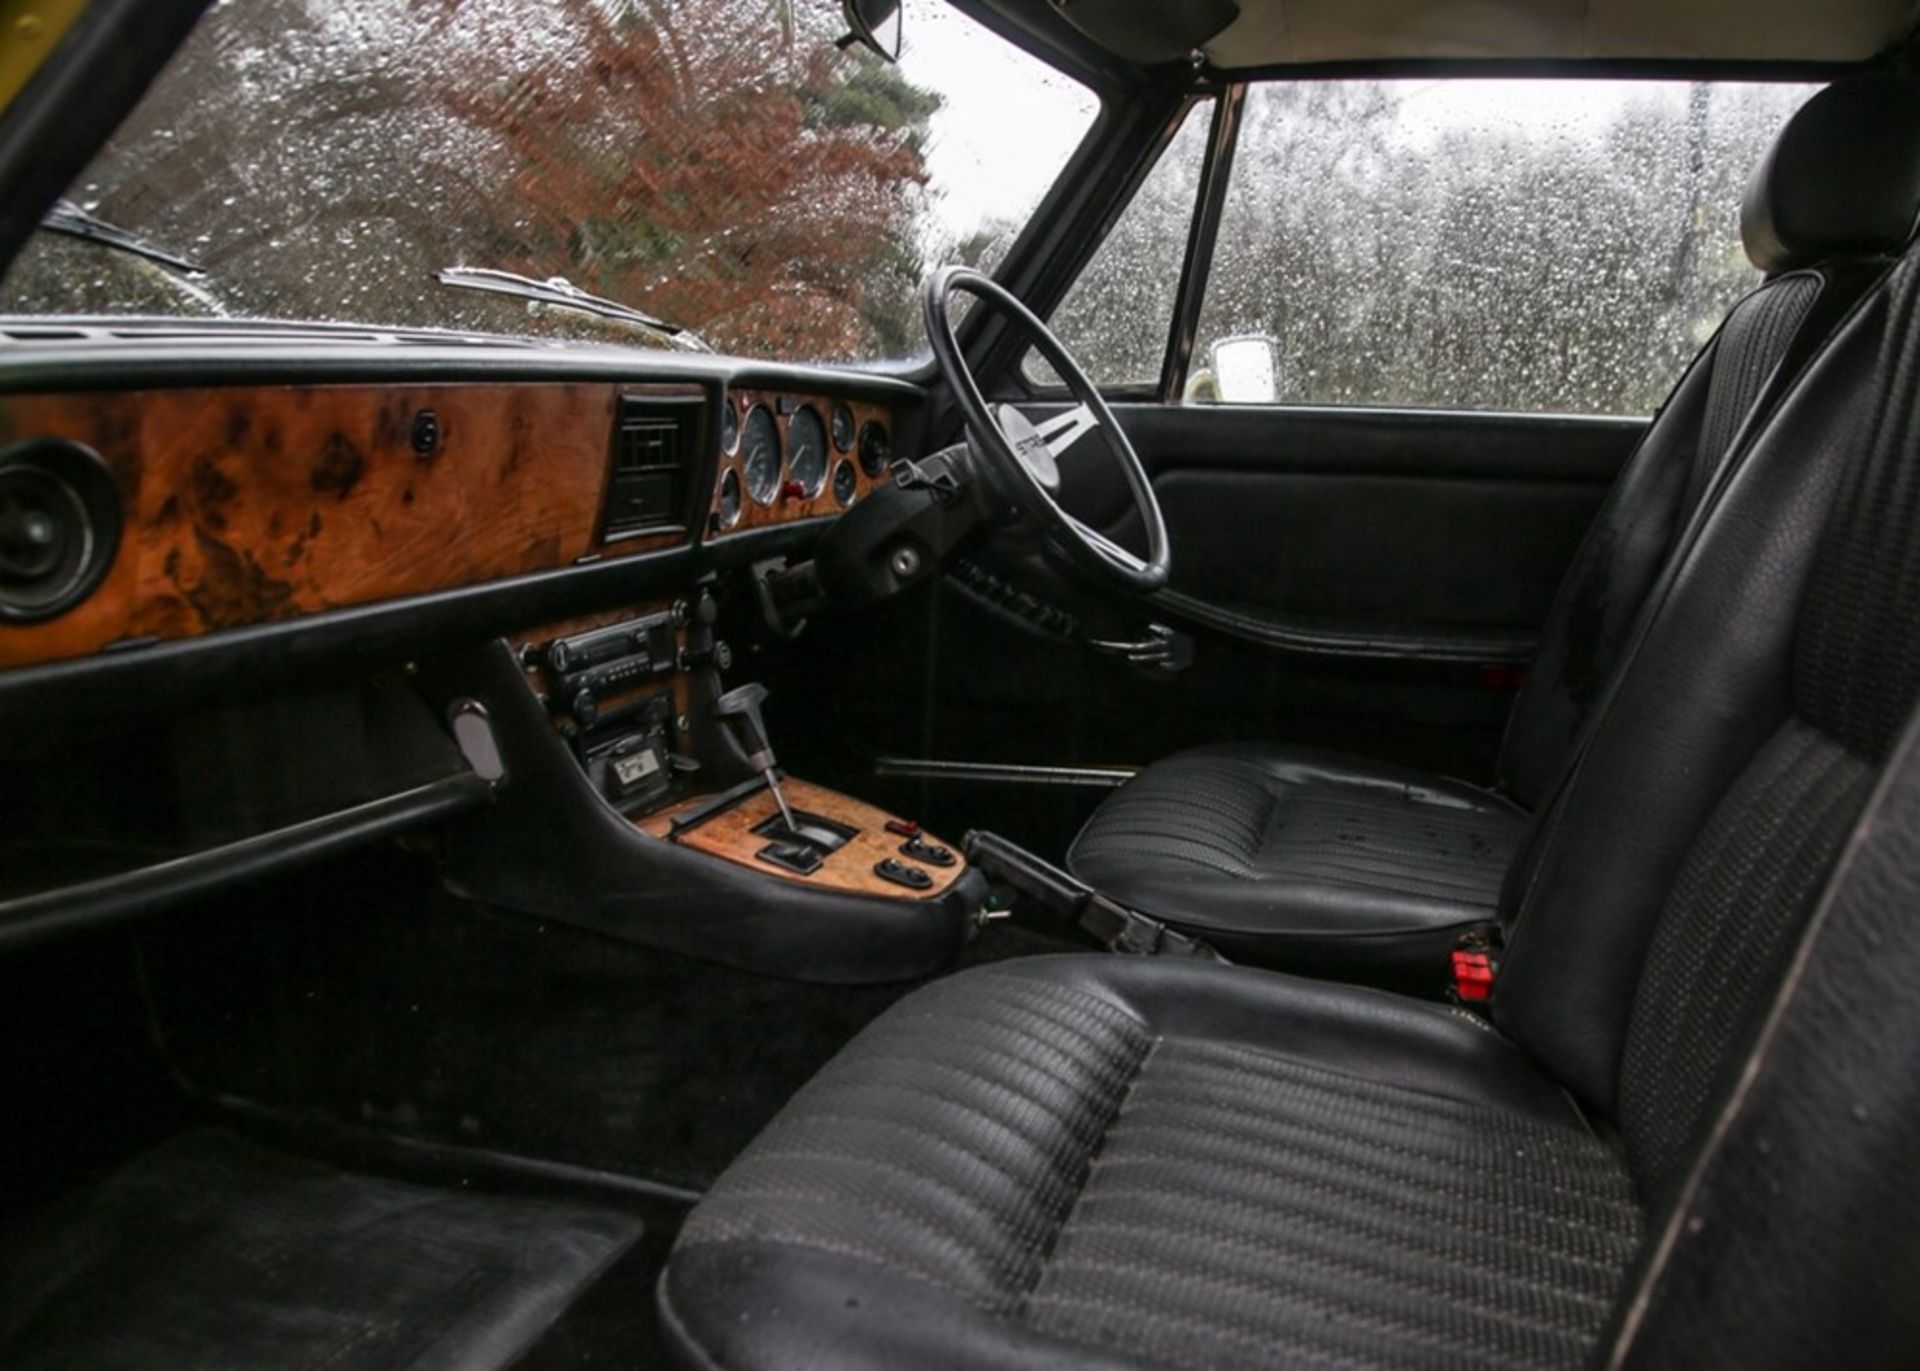 1974 Triumph Stag *WITHDRAWN* - Image 7 of 8